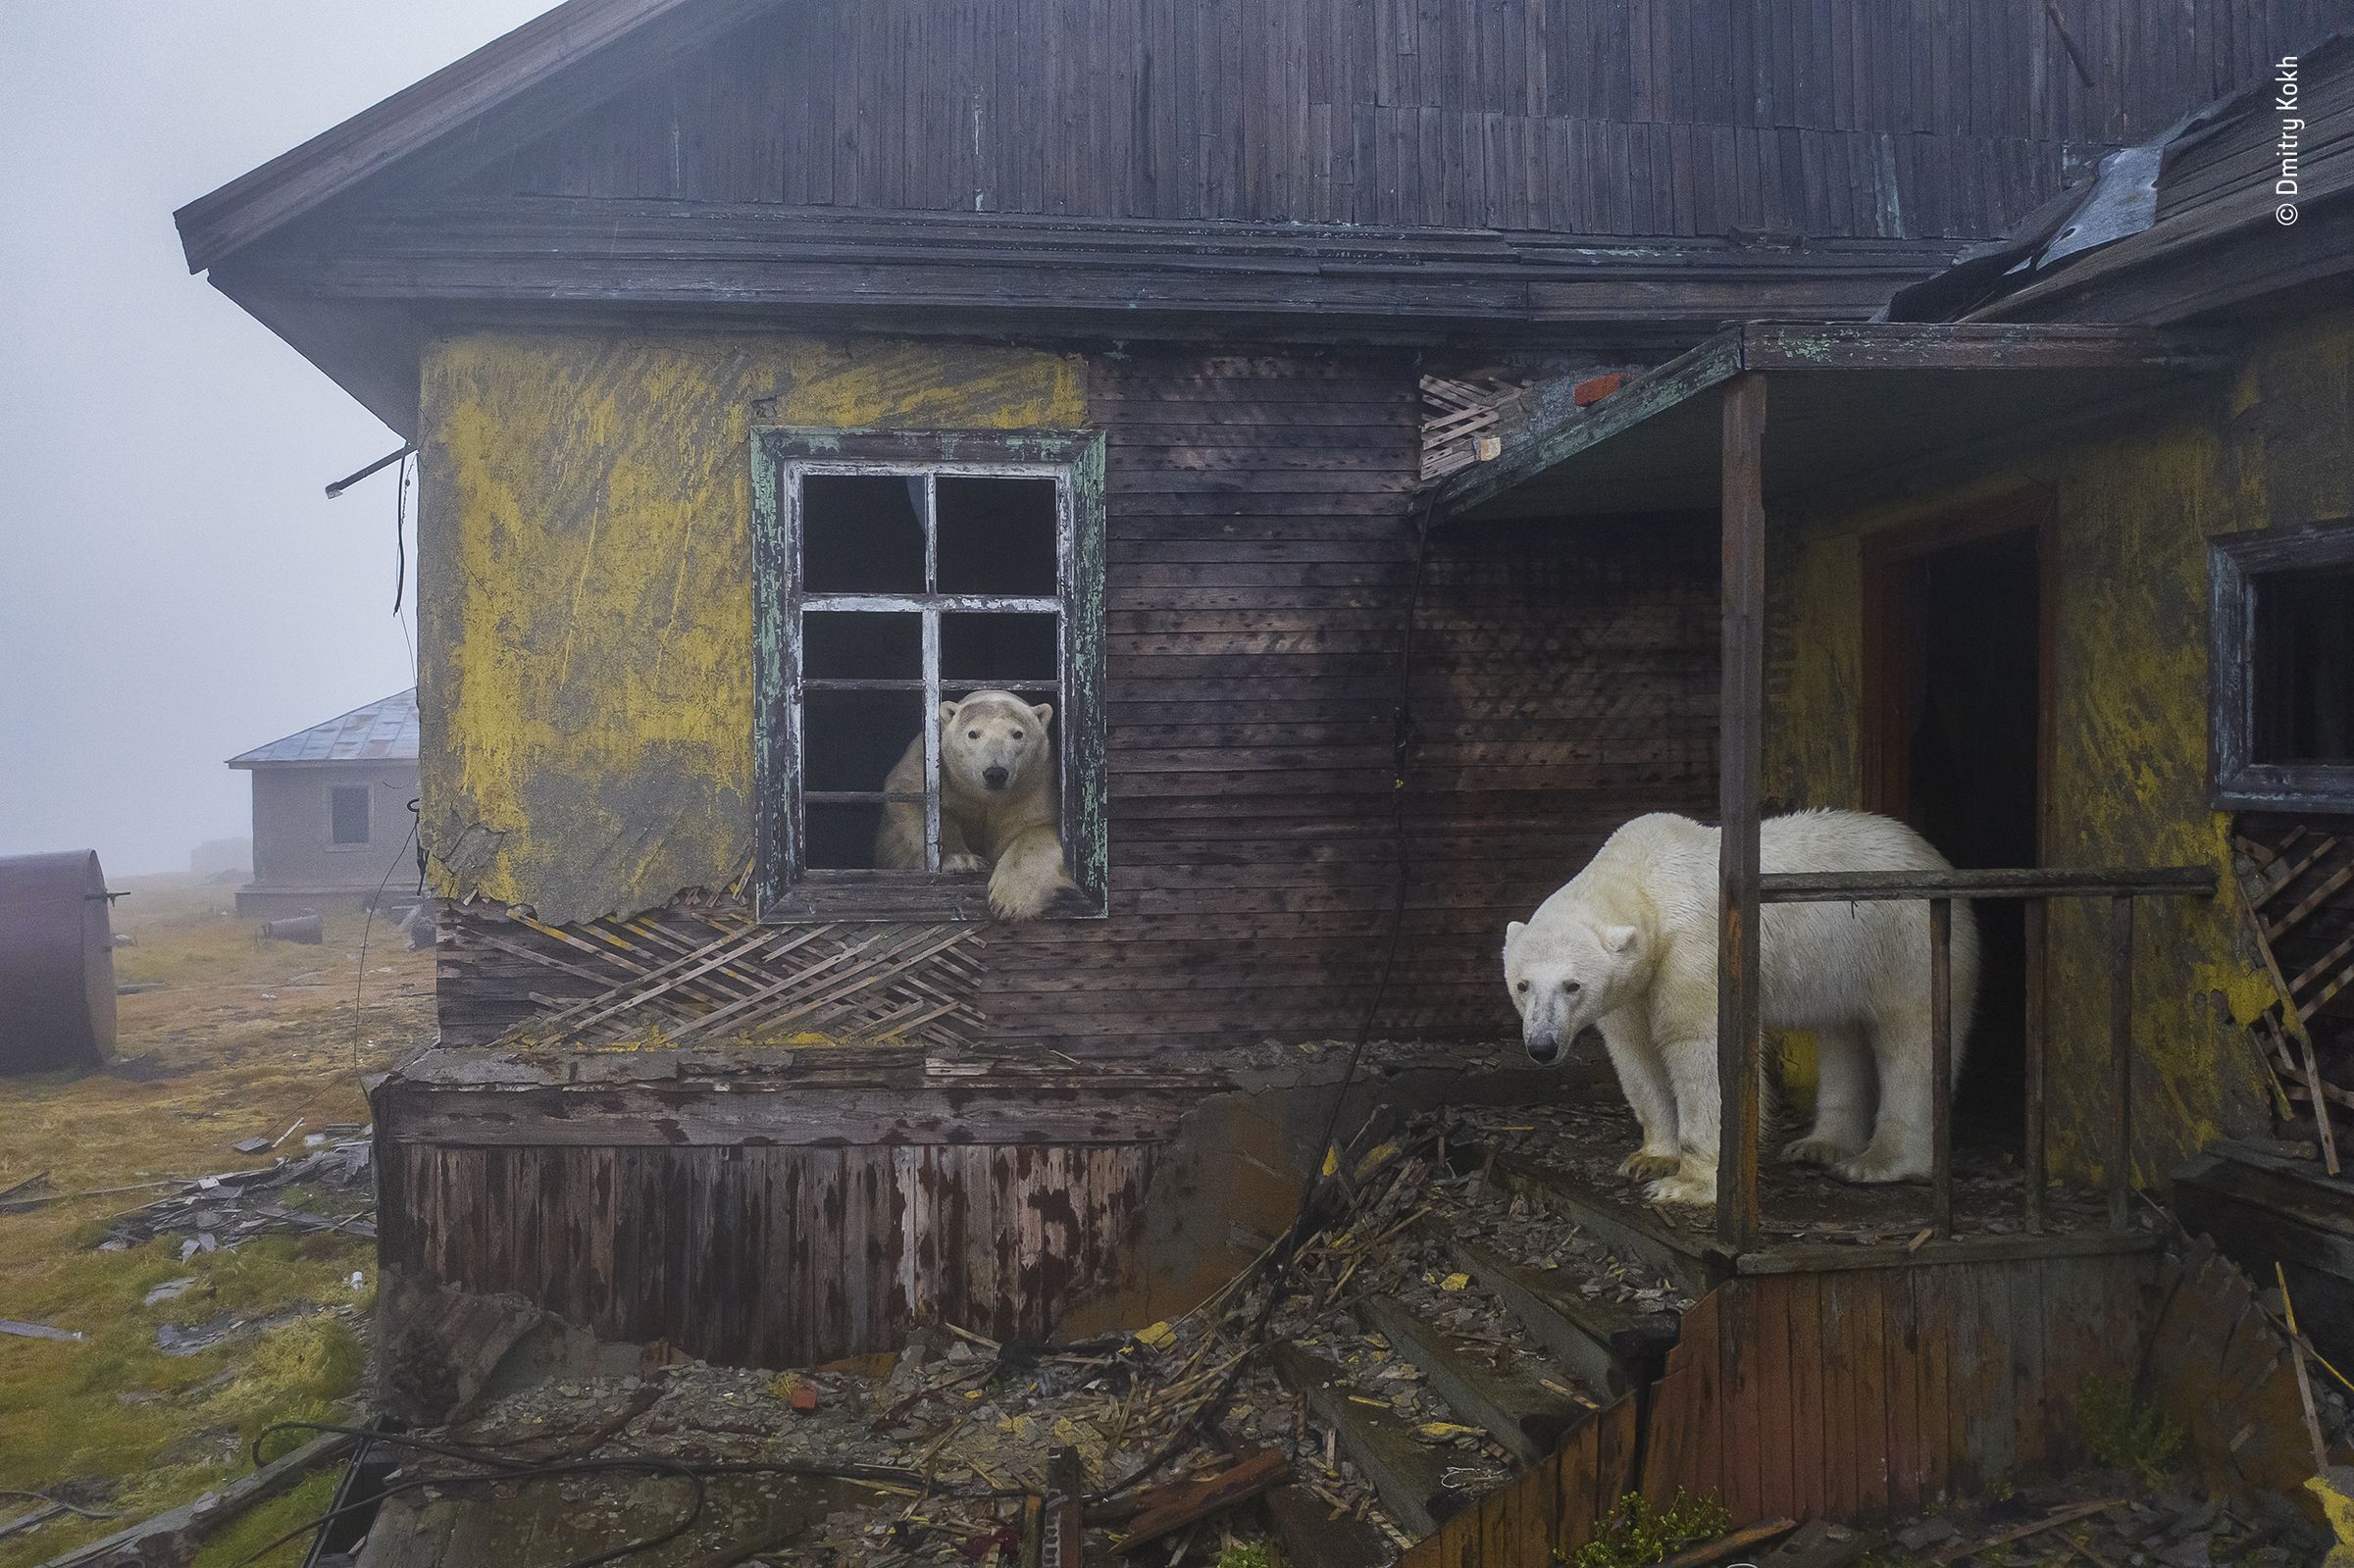 Two polar bears in a house shrouded in fog. One stands on the front porch, while another looks outside the window.